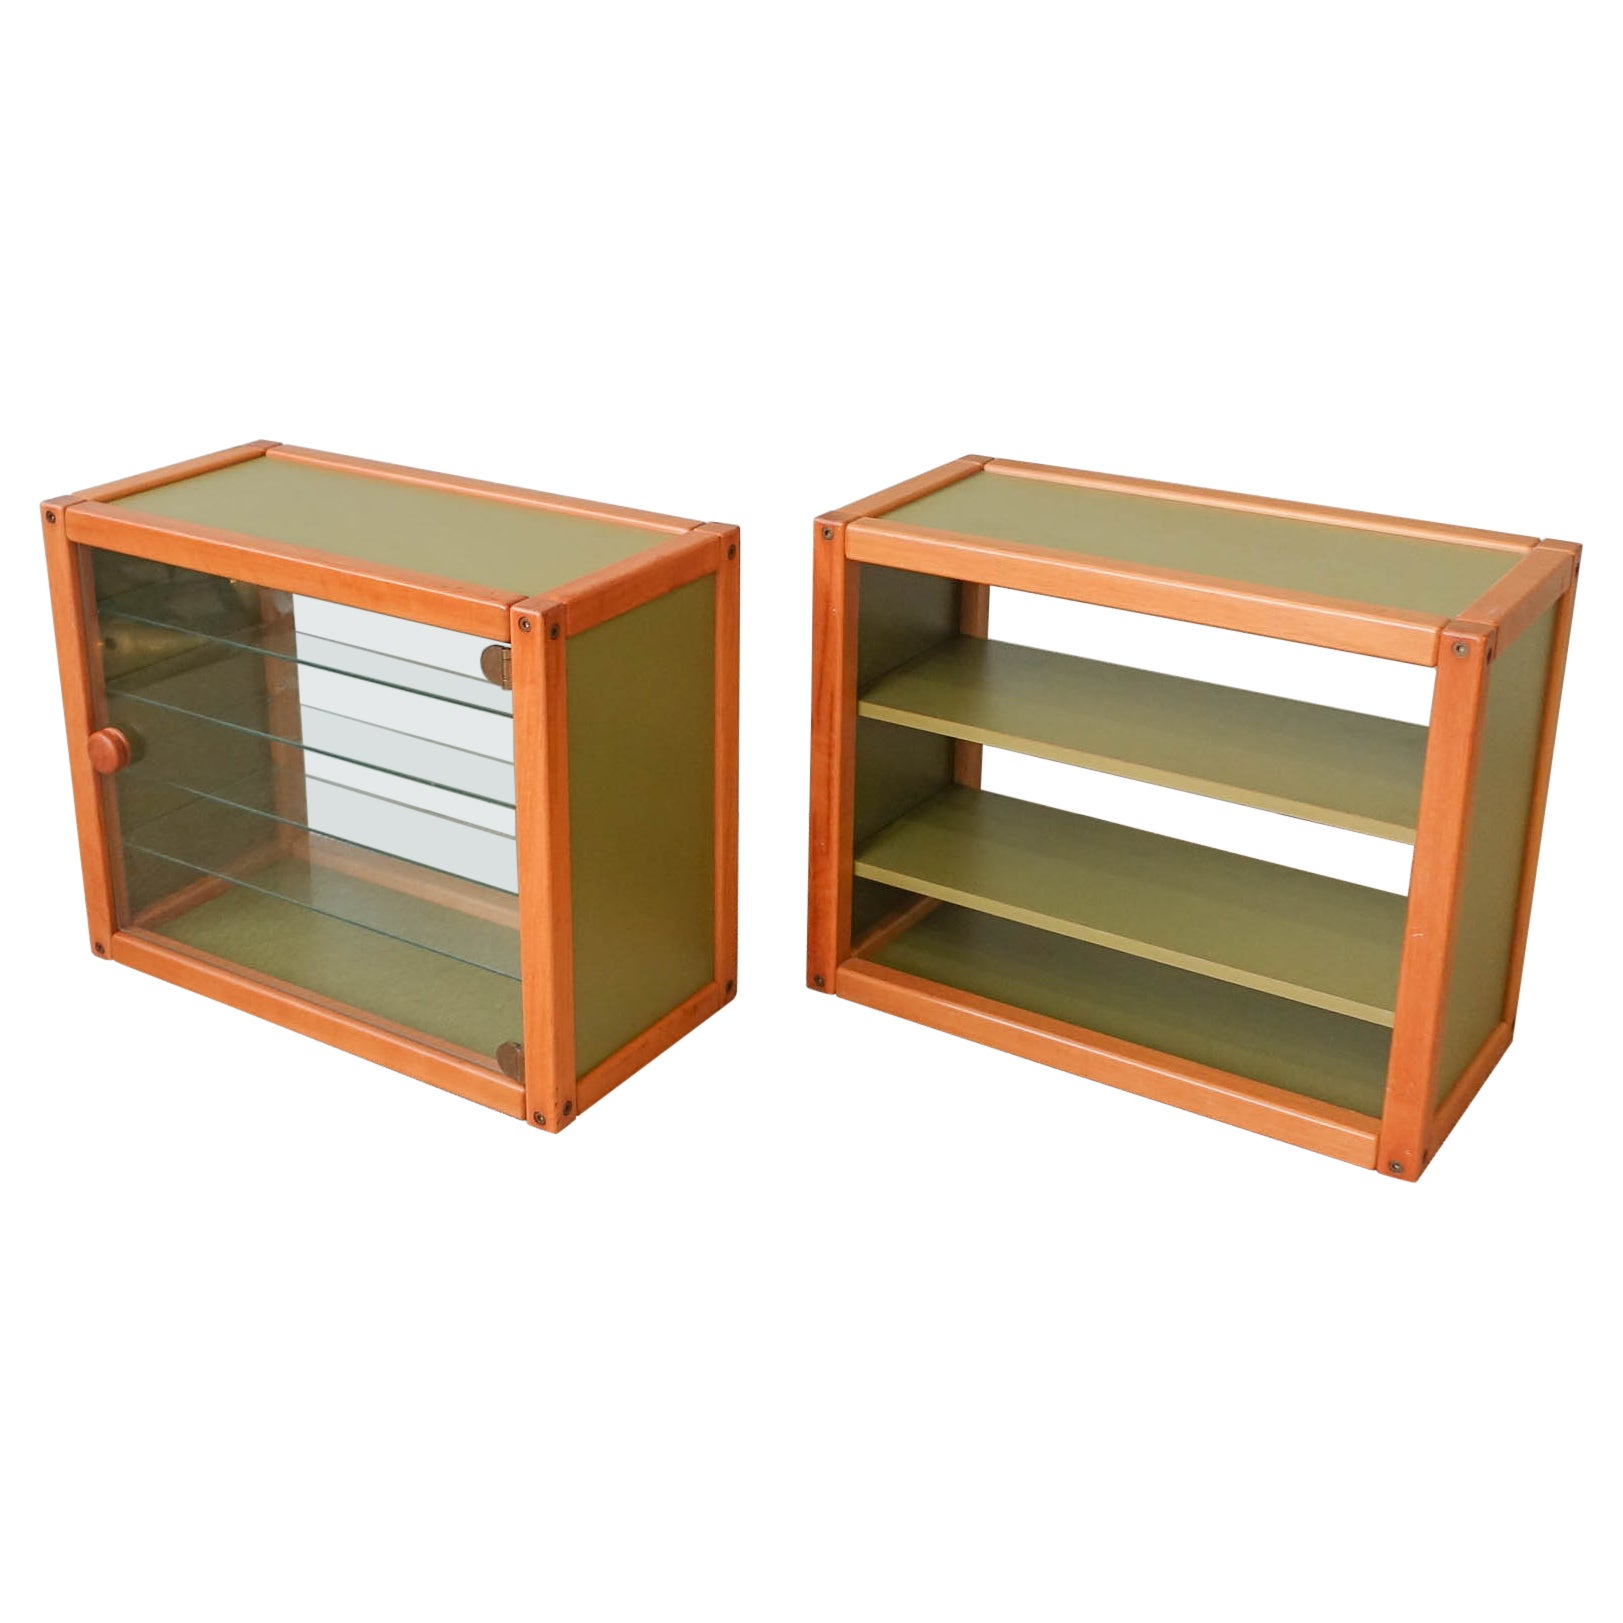 Pair of Vintage Profilsystem Collection Glass Storage Units by Elmar Flötotto For Sale